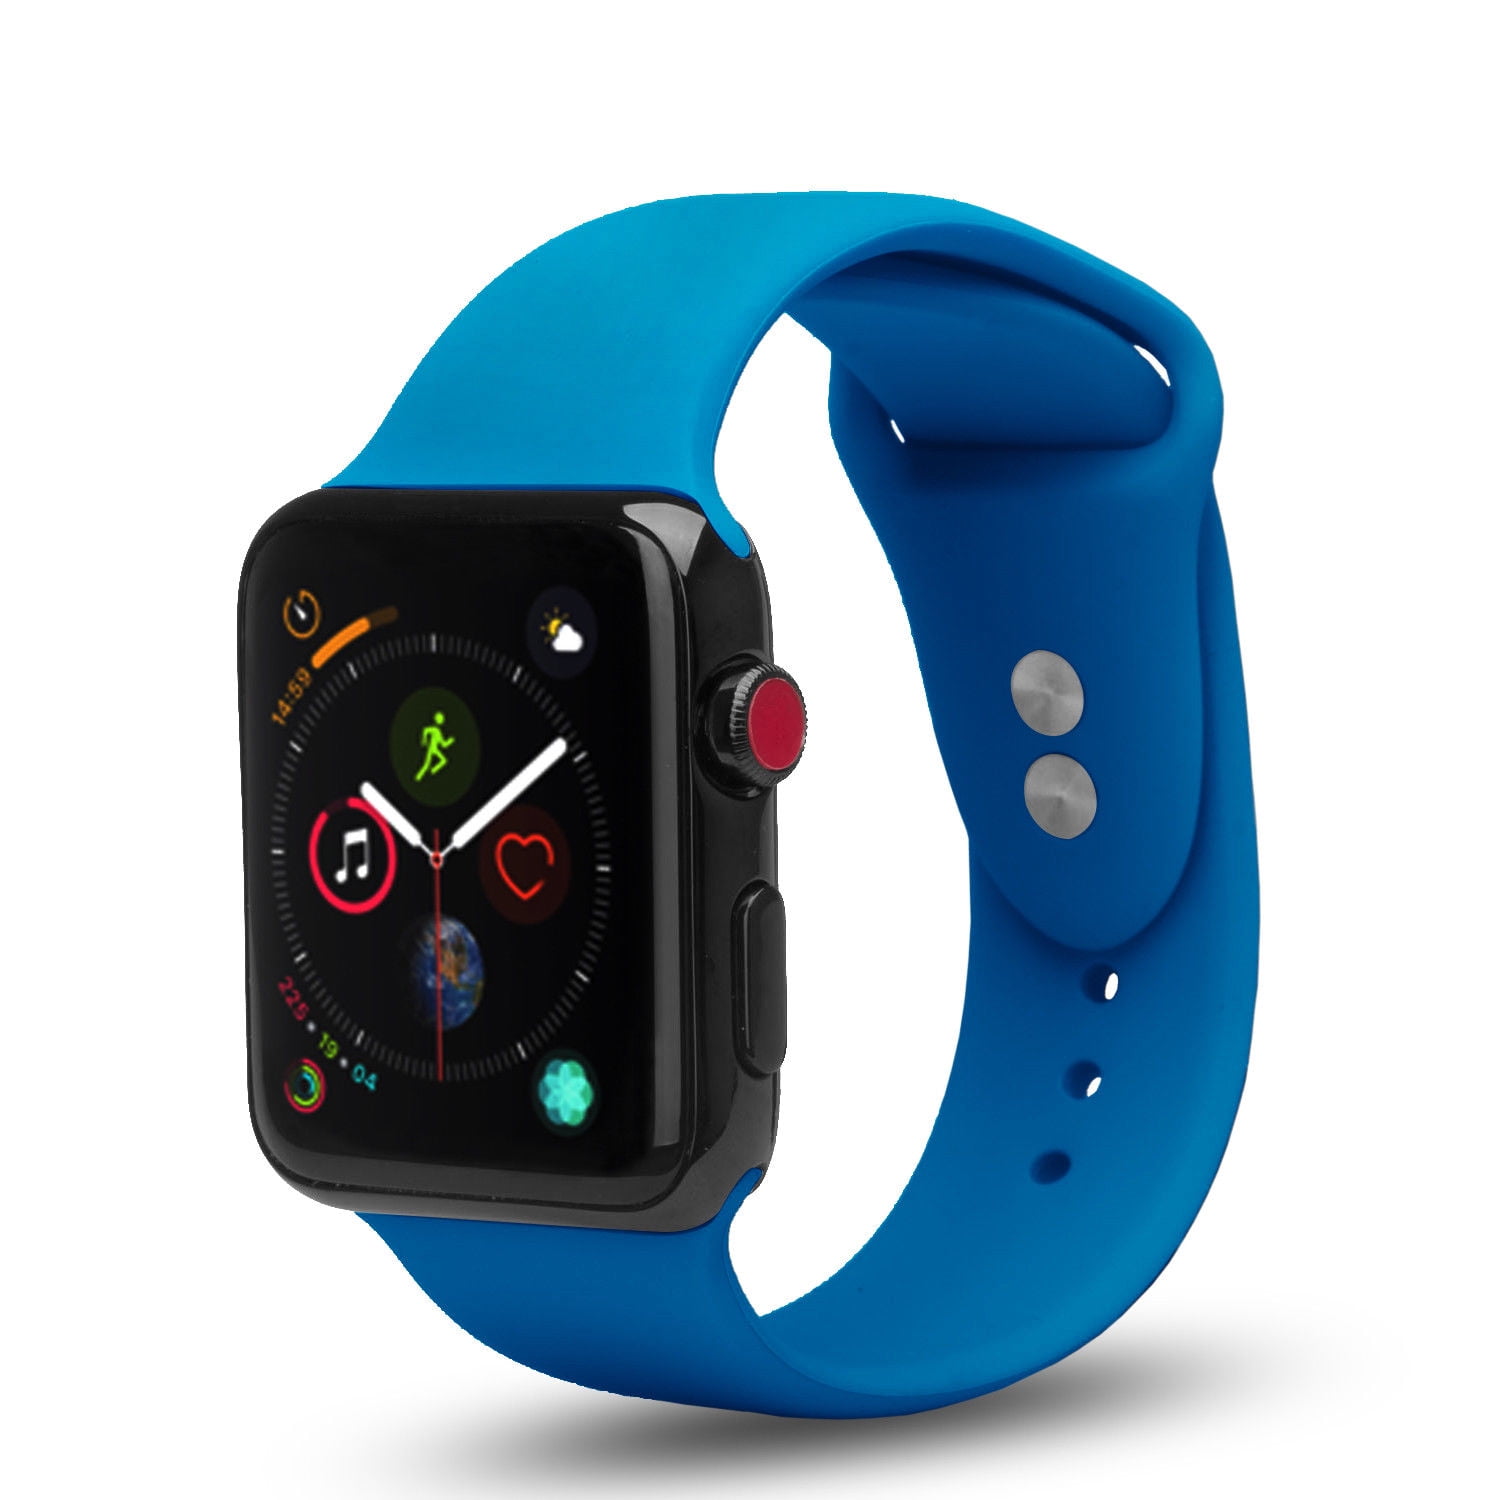 Almindelig Intuition Hest Apple Watch Soft Silicone Bands 42mm/44mm, Dual Locking Stud Wristband for iWatch  Apple Watch Series 1/2/3/4/Nike+ - Dark Blue - Walmart.com